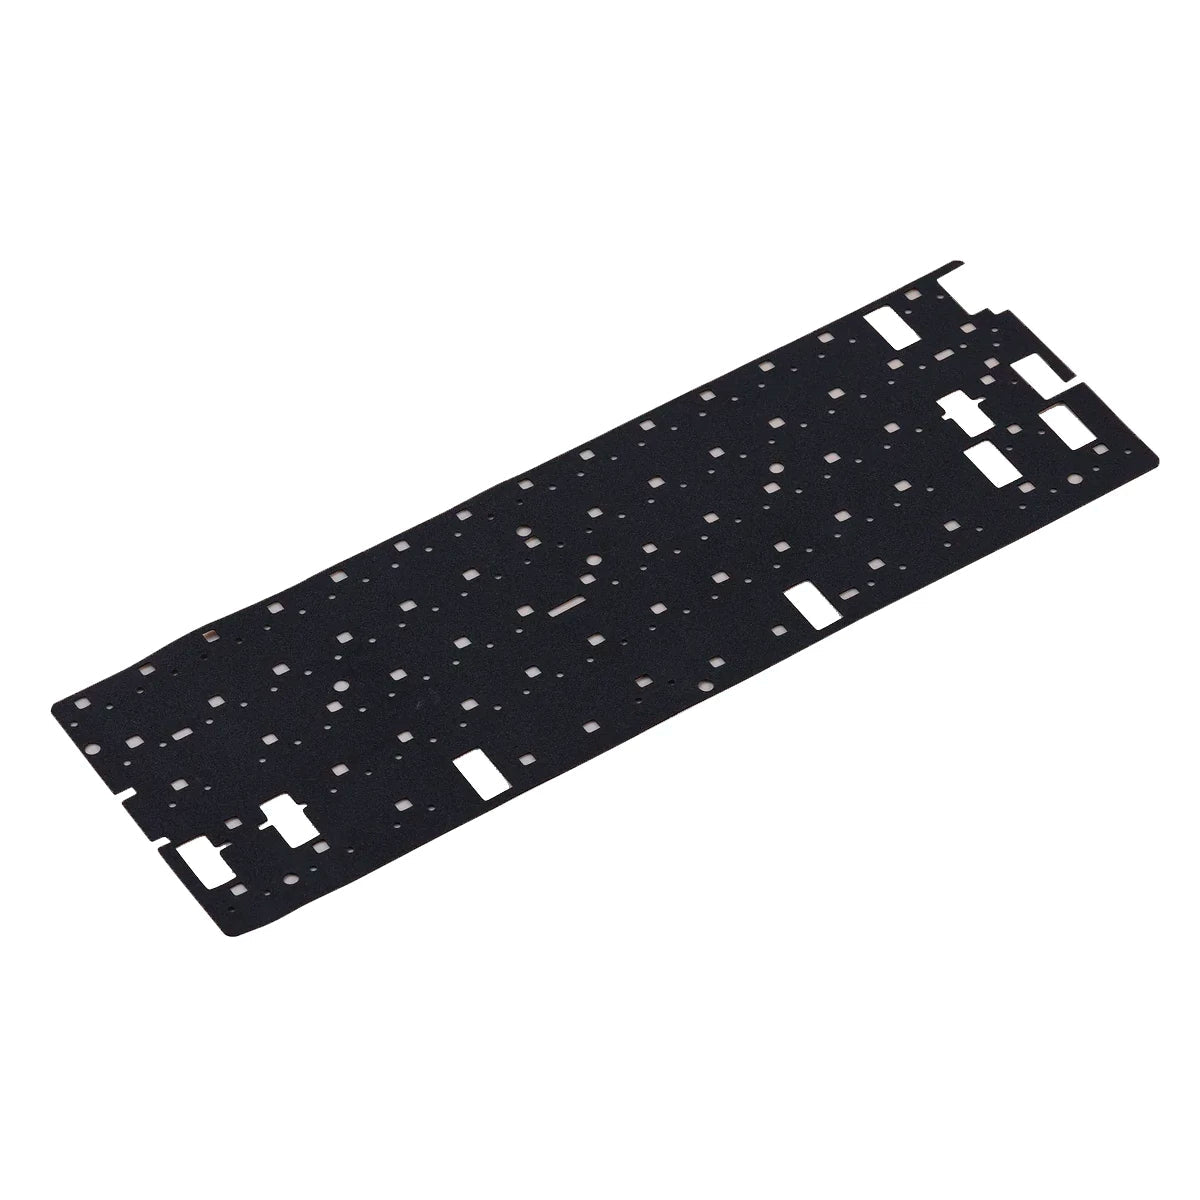 KBDfans Wooting60 HE Compatible Plates - Divinikey